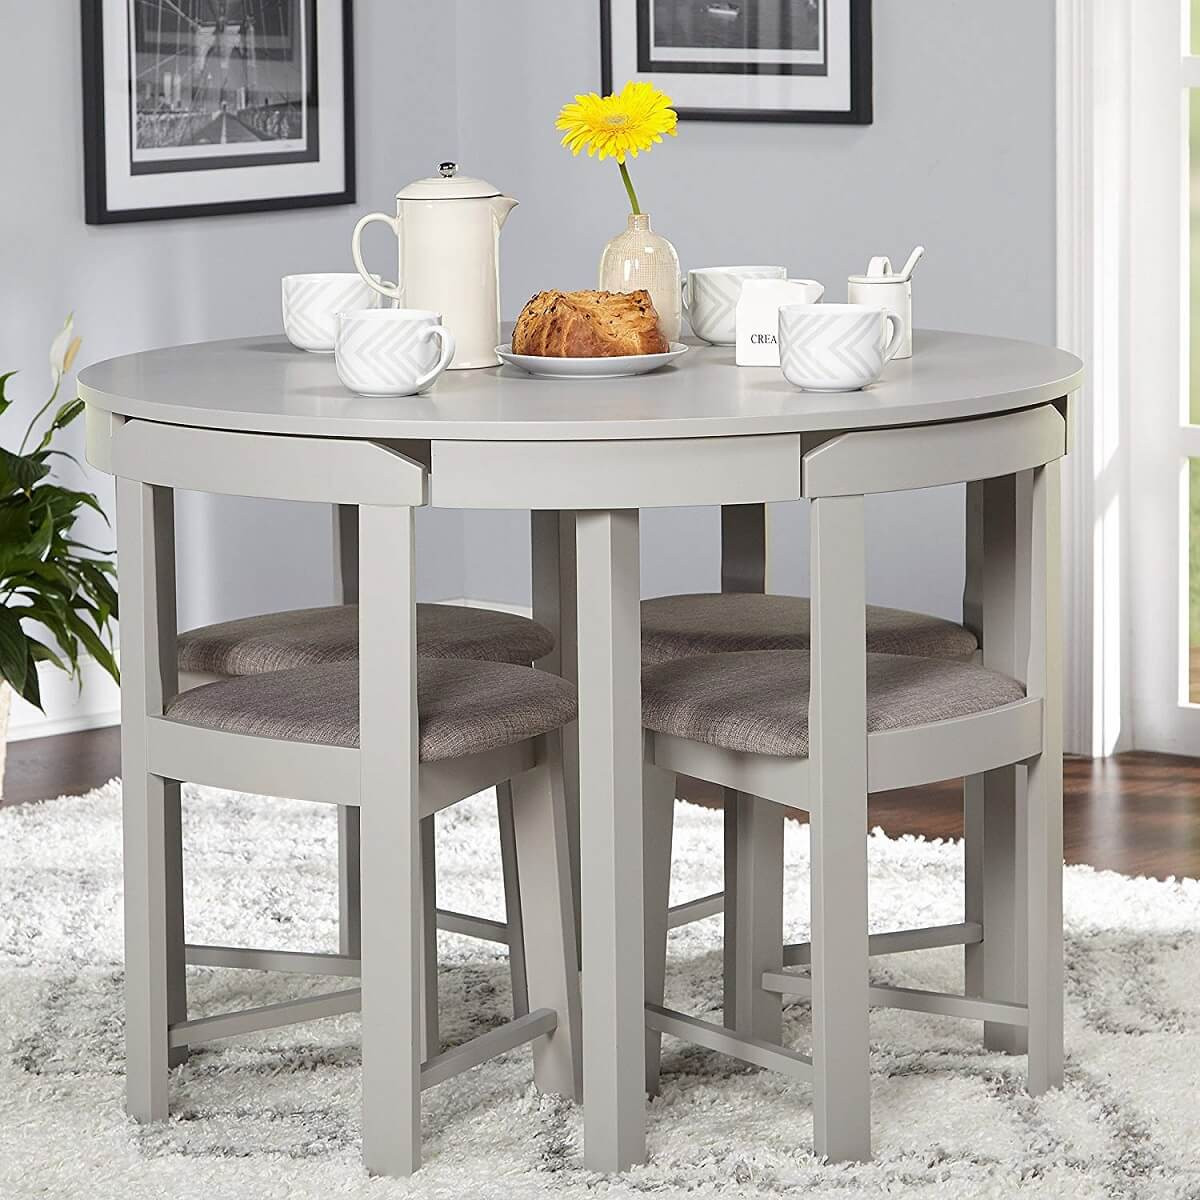 Small Kitchen Tables With Bench
 19 Small Kitchen Tables For Conserving Space • Insteading